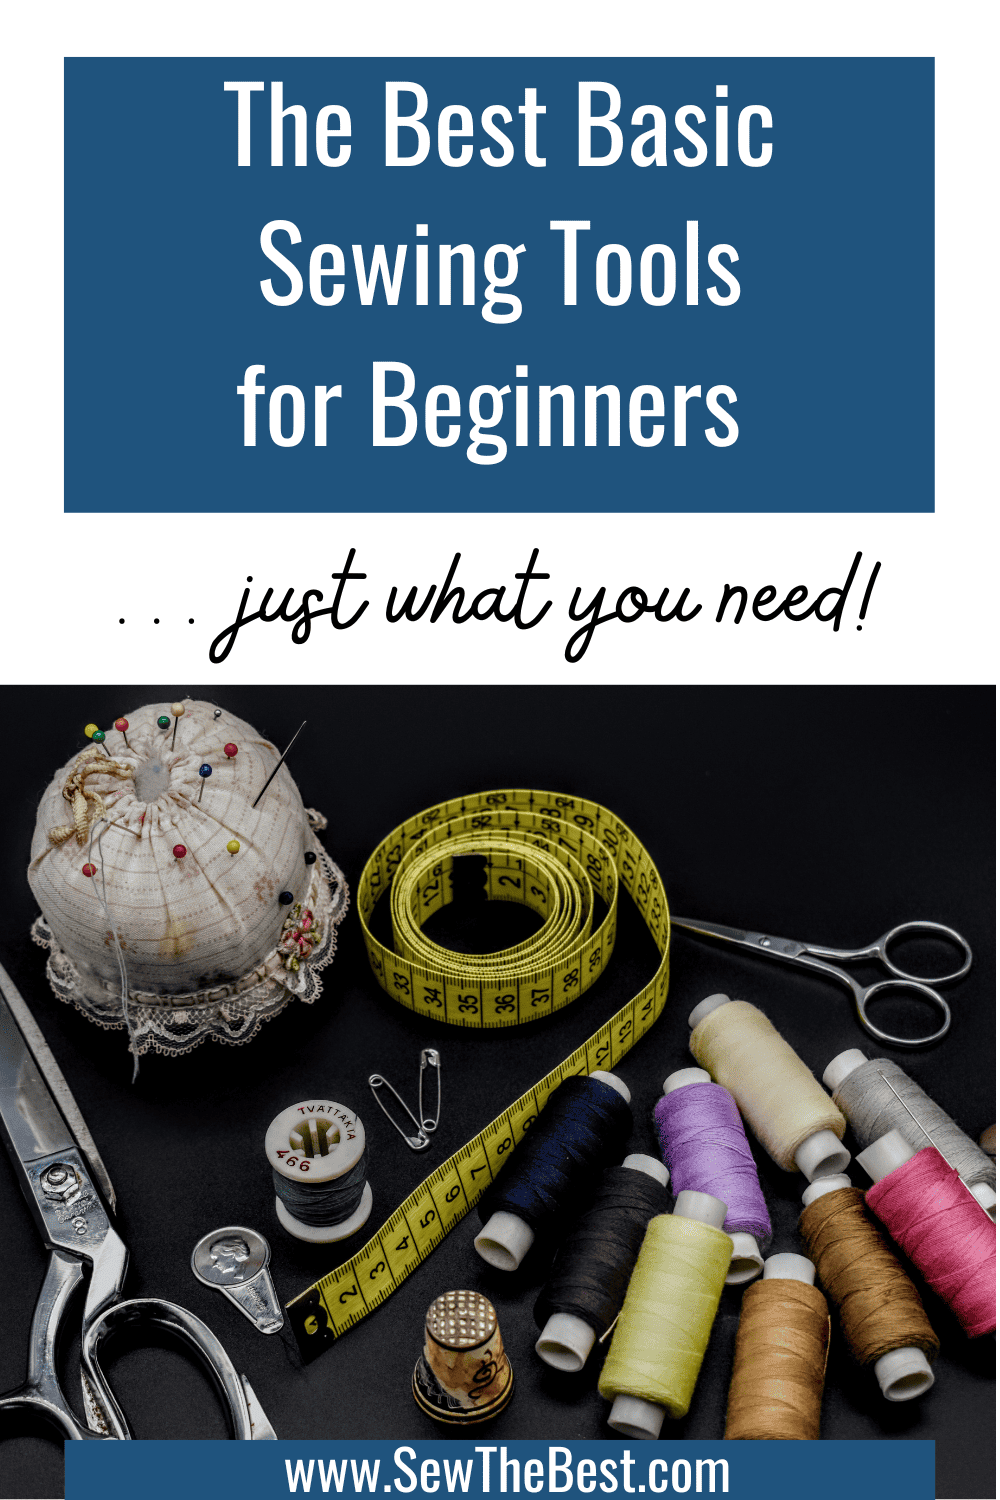 The Best Basic Sewing Tools for Beginners ... just what you need! Picture of sewing tools - pins, scissors, thread, tape measure, needle threader, on a dark background follows.